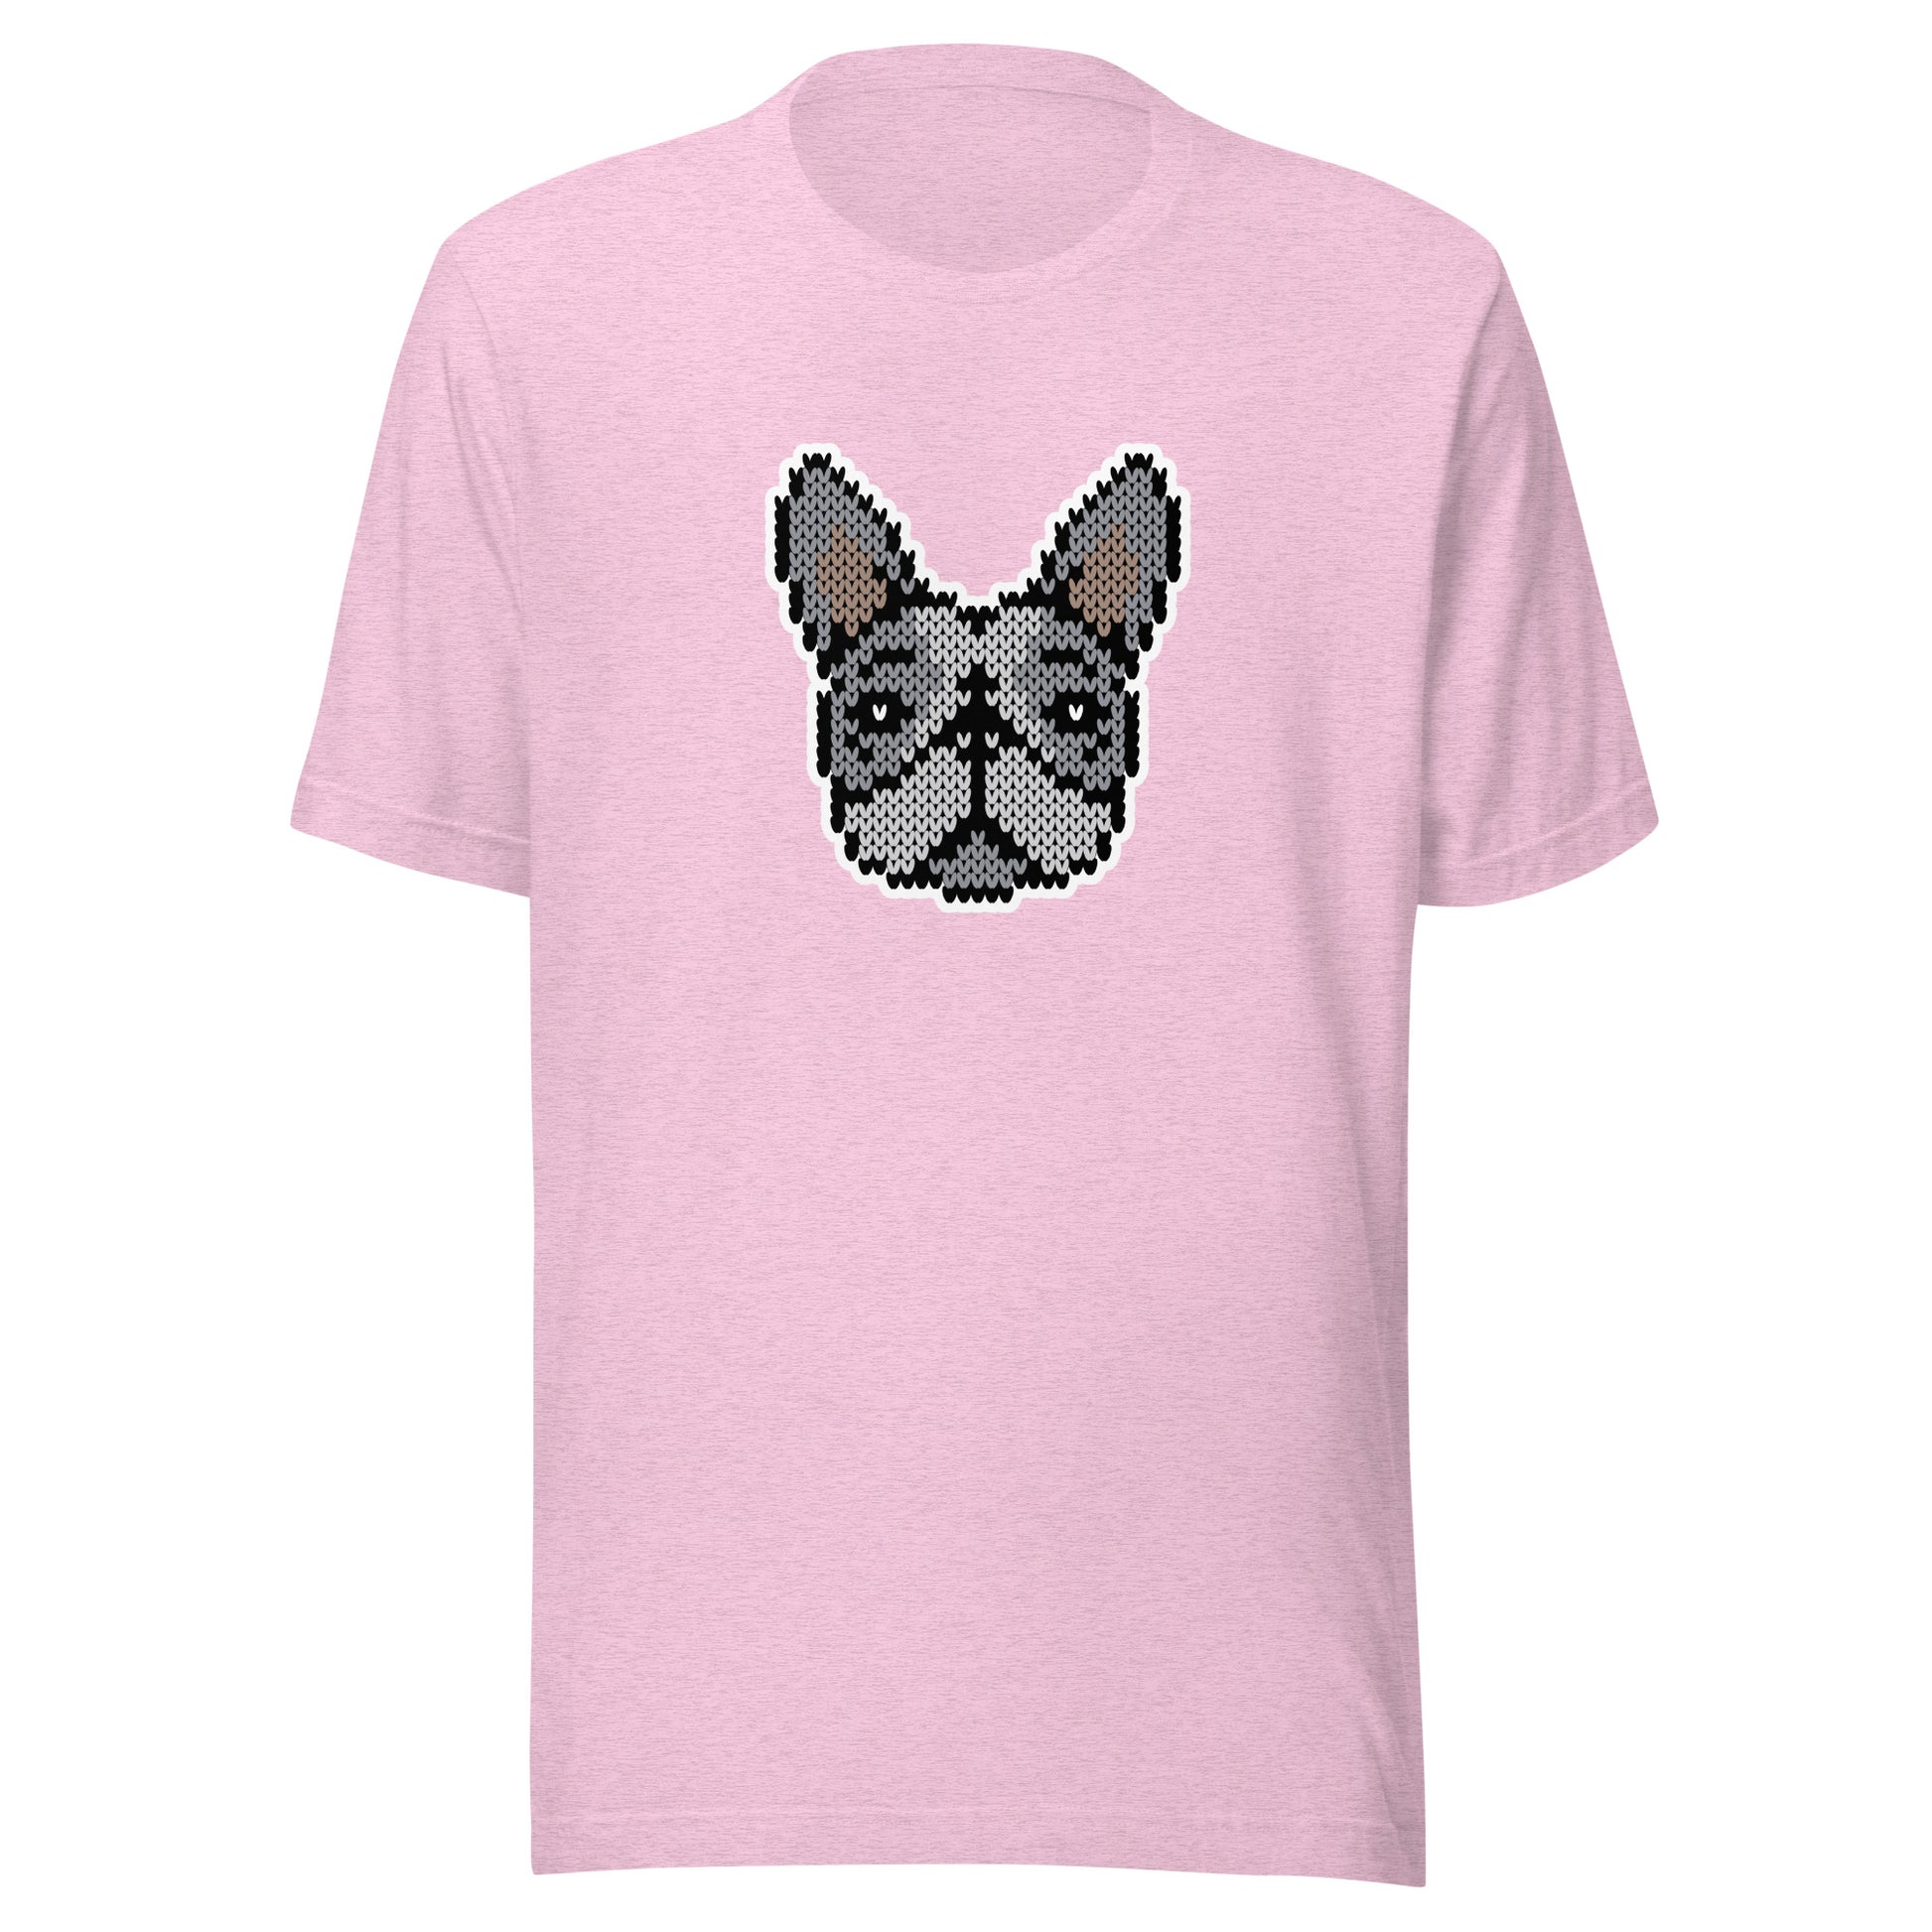 Sommer T-Shirt Frenchie (blue pied)